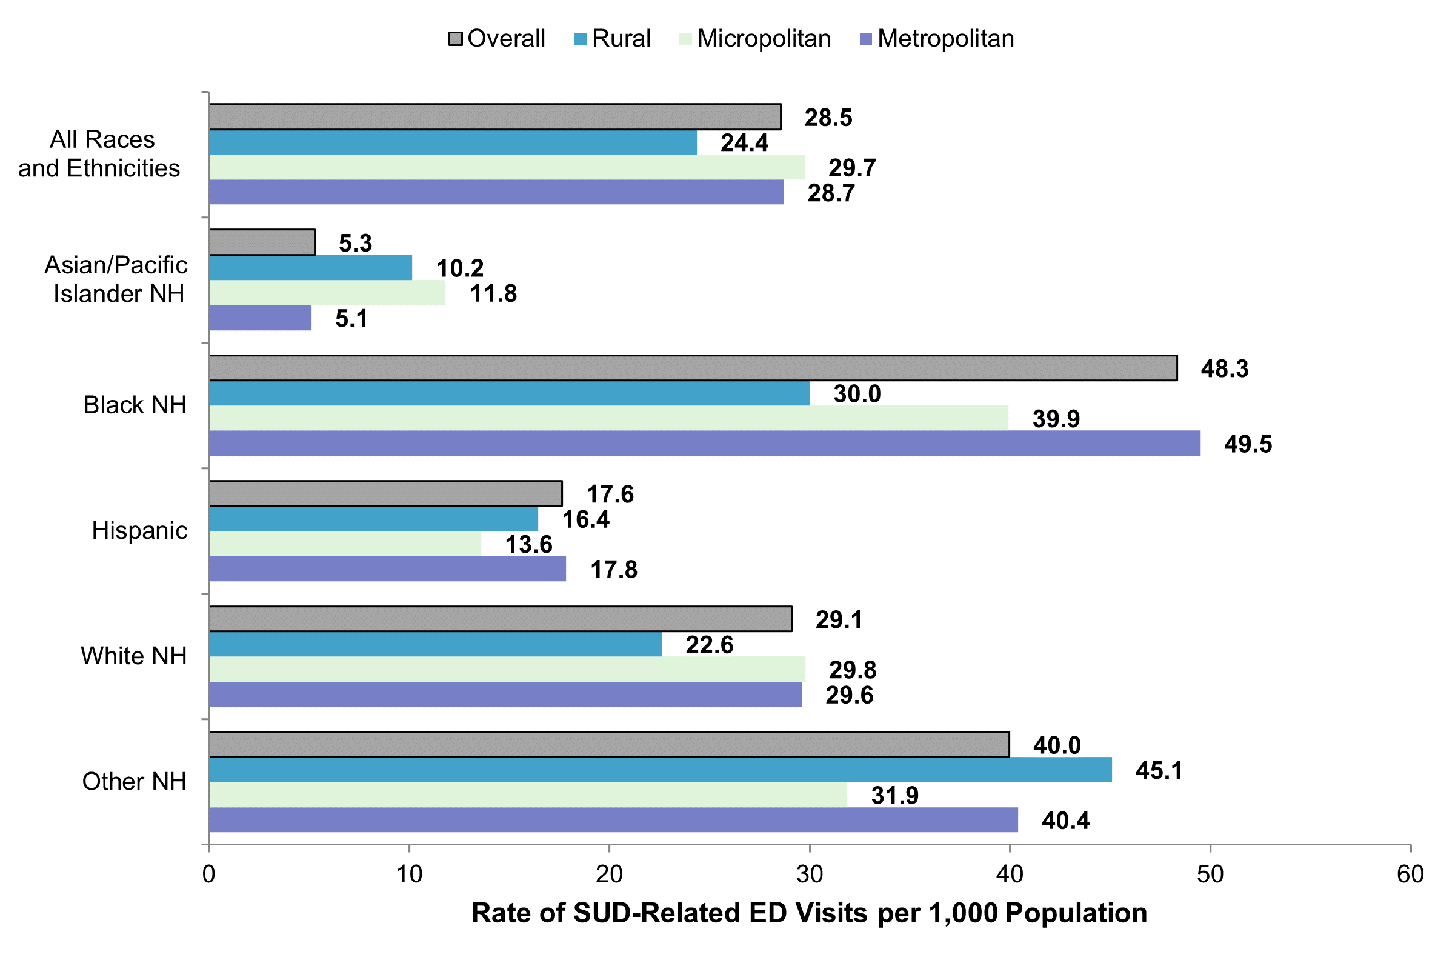 Bar chart showing the rate per 1,000 population of substance use disorder (SUD)-related emergency department (ED) visits in 2019 by urban/rural location and by race and ethnicity (Asian/Pacific Islander non-Hispanic [NH], Black NH, Hispanic, White NH, and other NH). Data are provided in Supplemental Table 3.